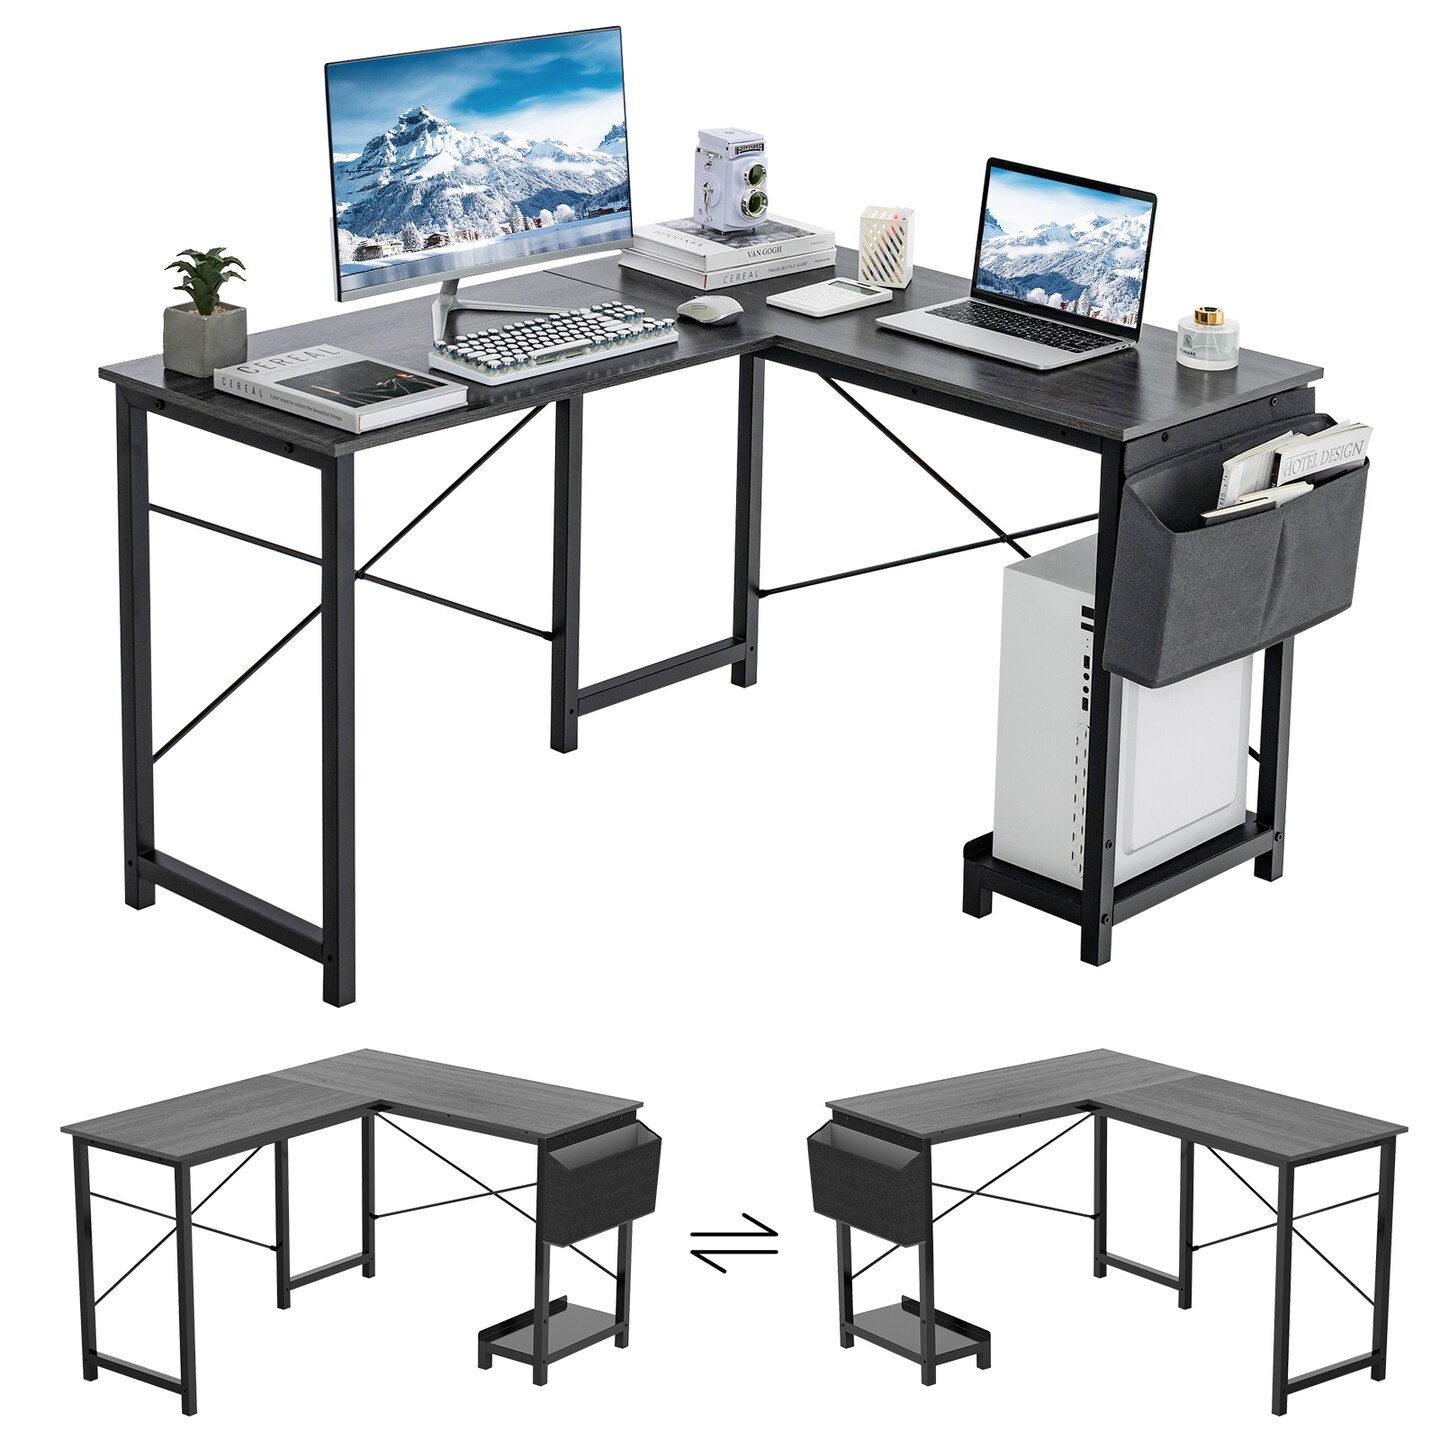 Modern Reversible Computer Desk With Storage Pocket And Cpu Stand For Working Writing Gaming